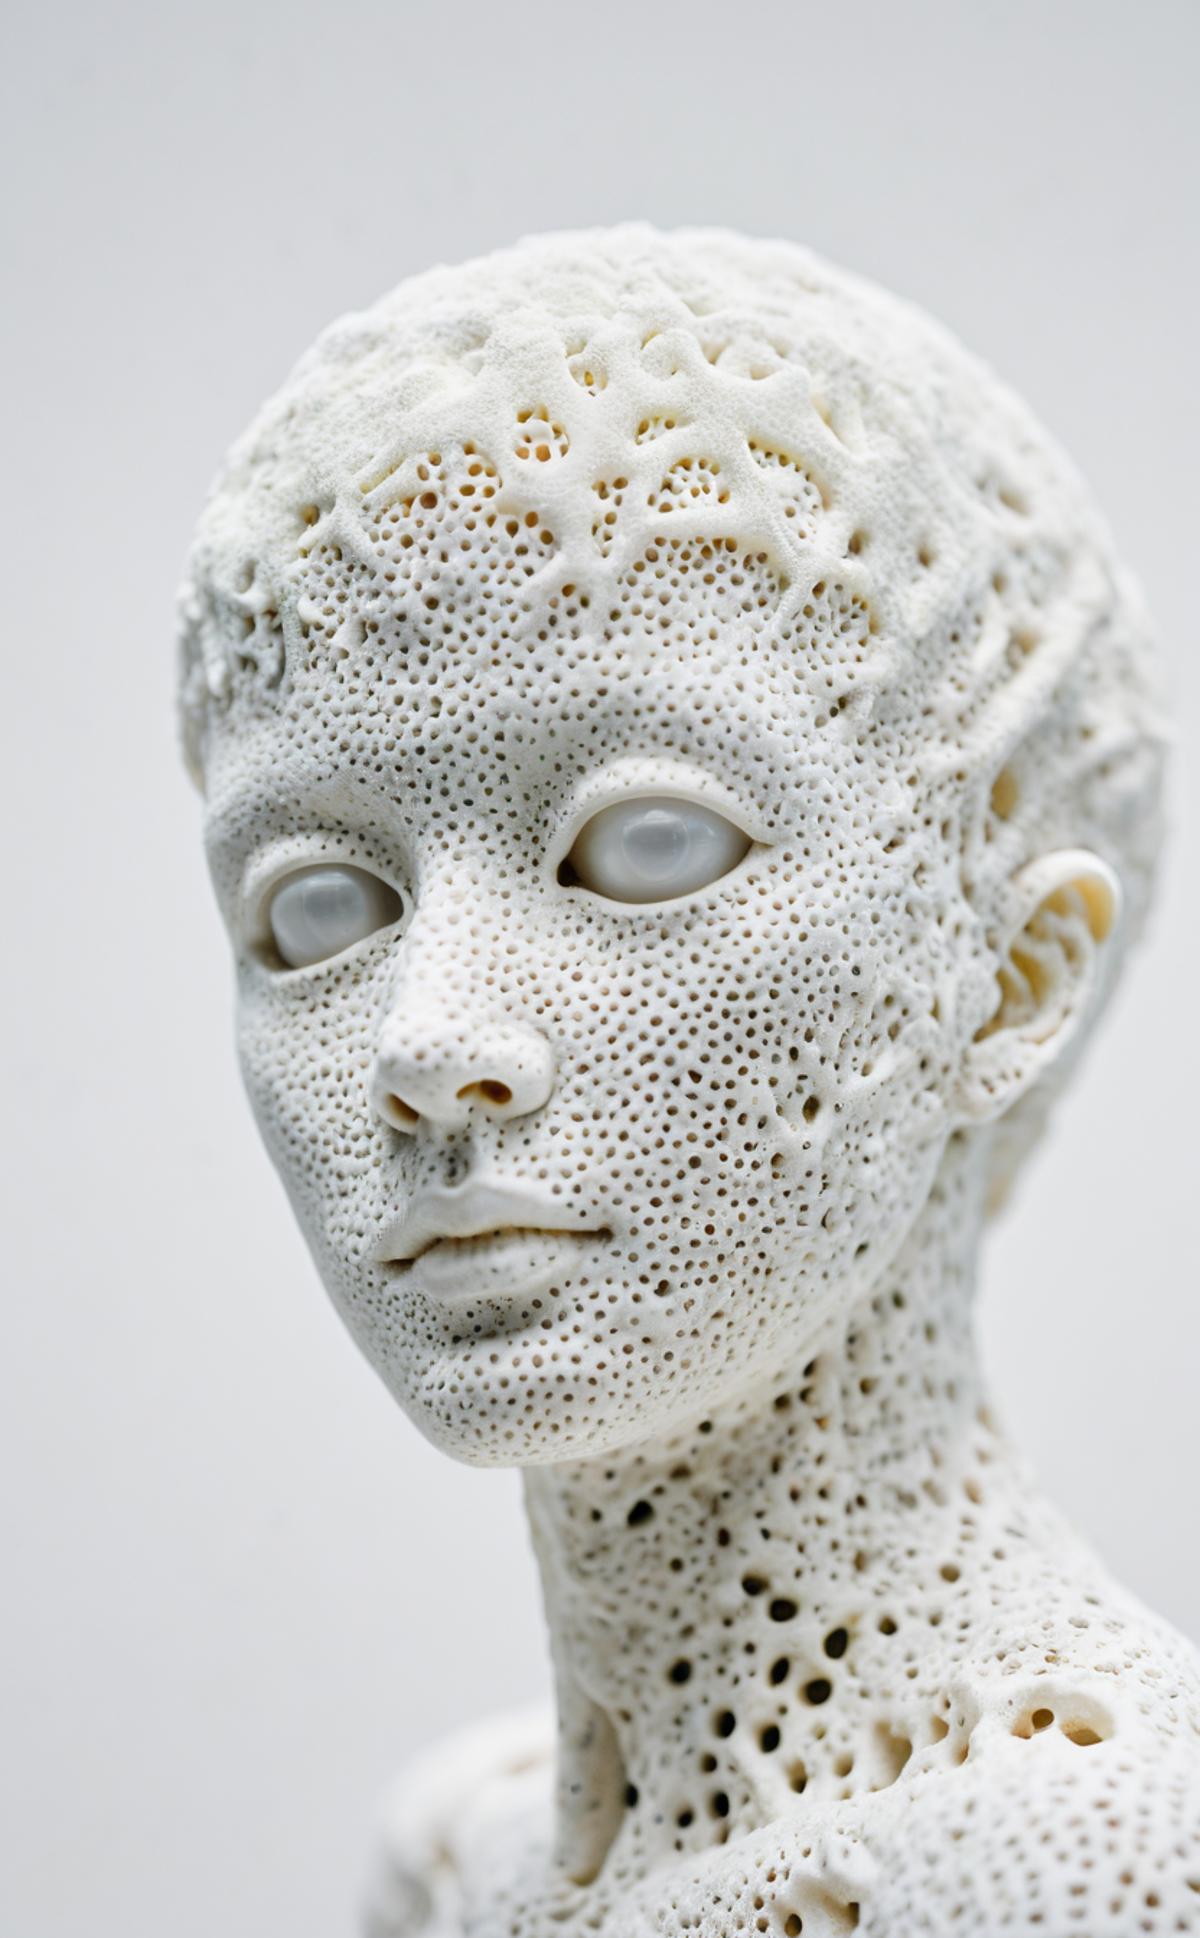 A Detailed White Sculpture of a Head with Large Eyes